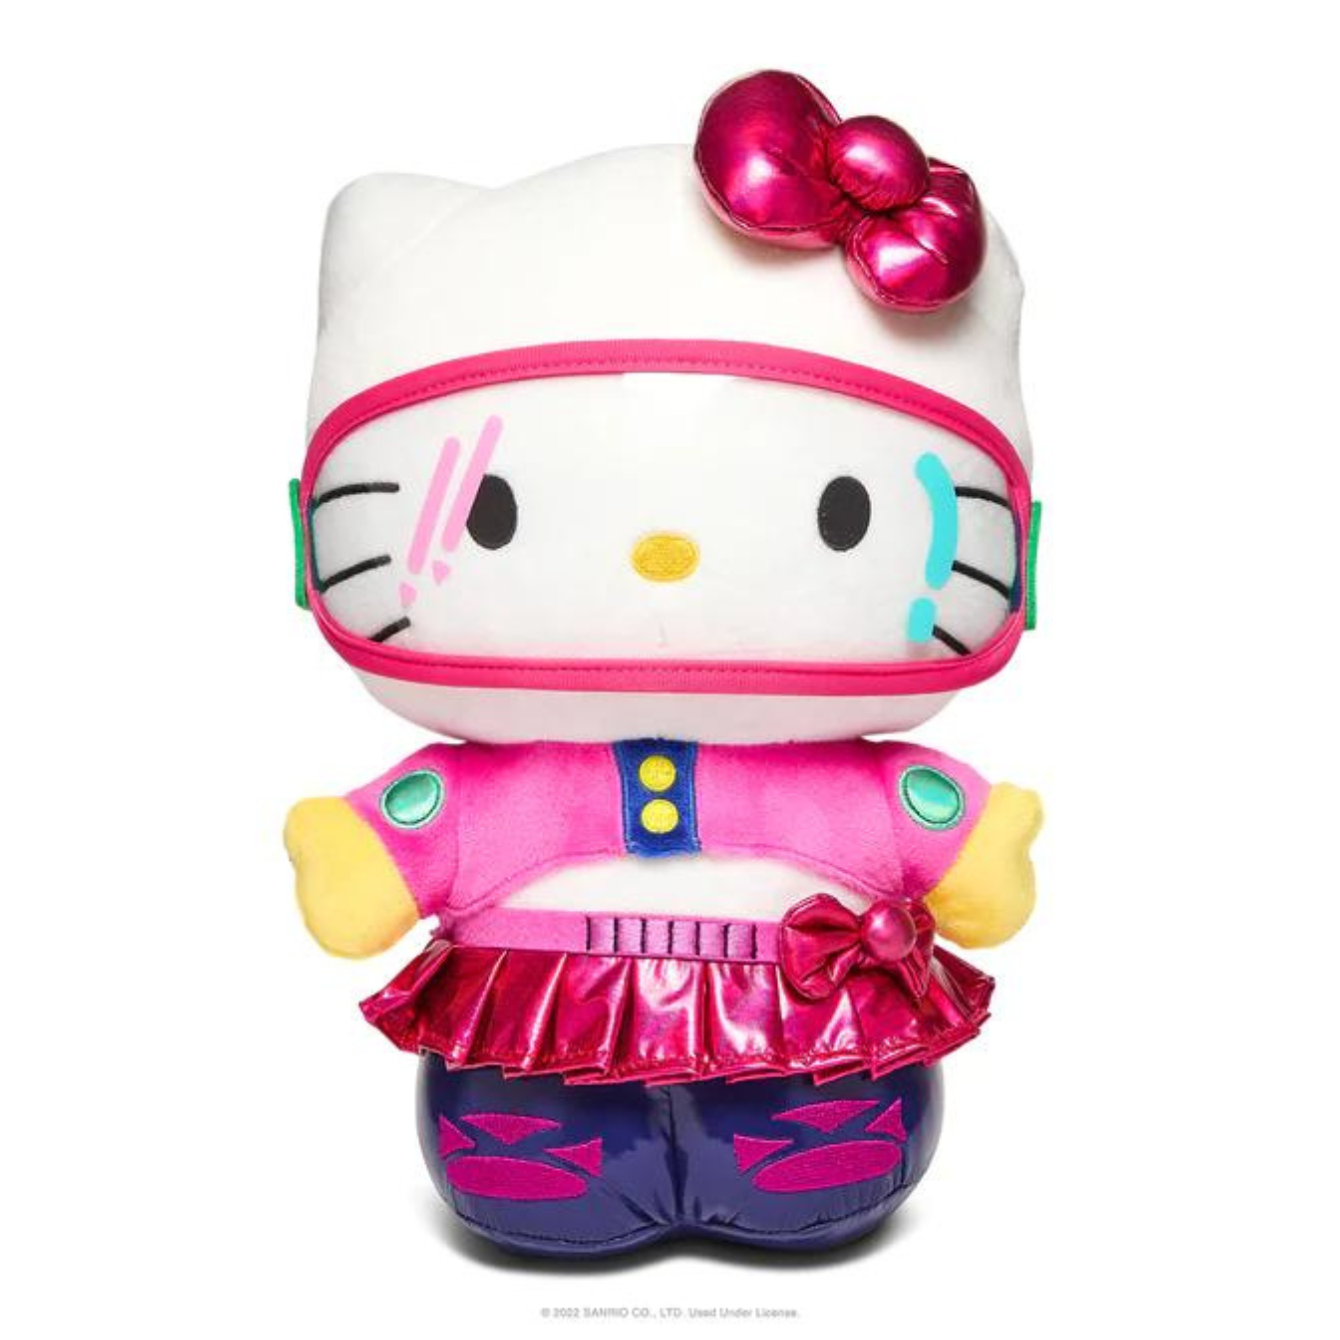 HELLO KITTY® AND FRIENDS ARCADE GIRL 13" PLUSH BY KIDROBOT